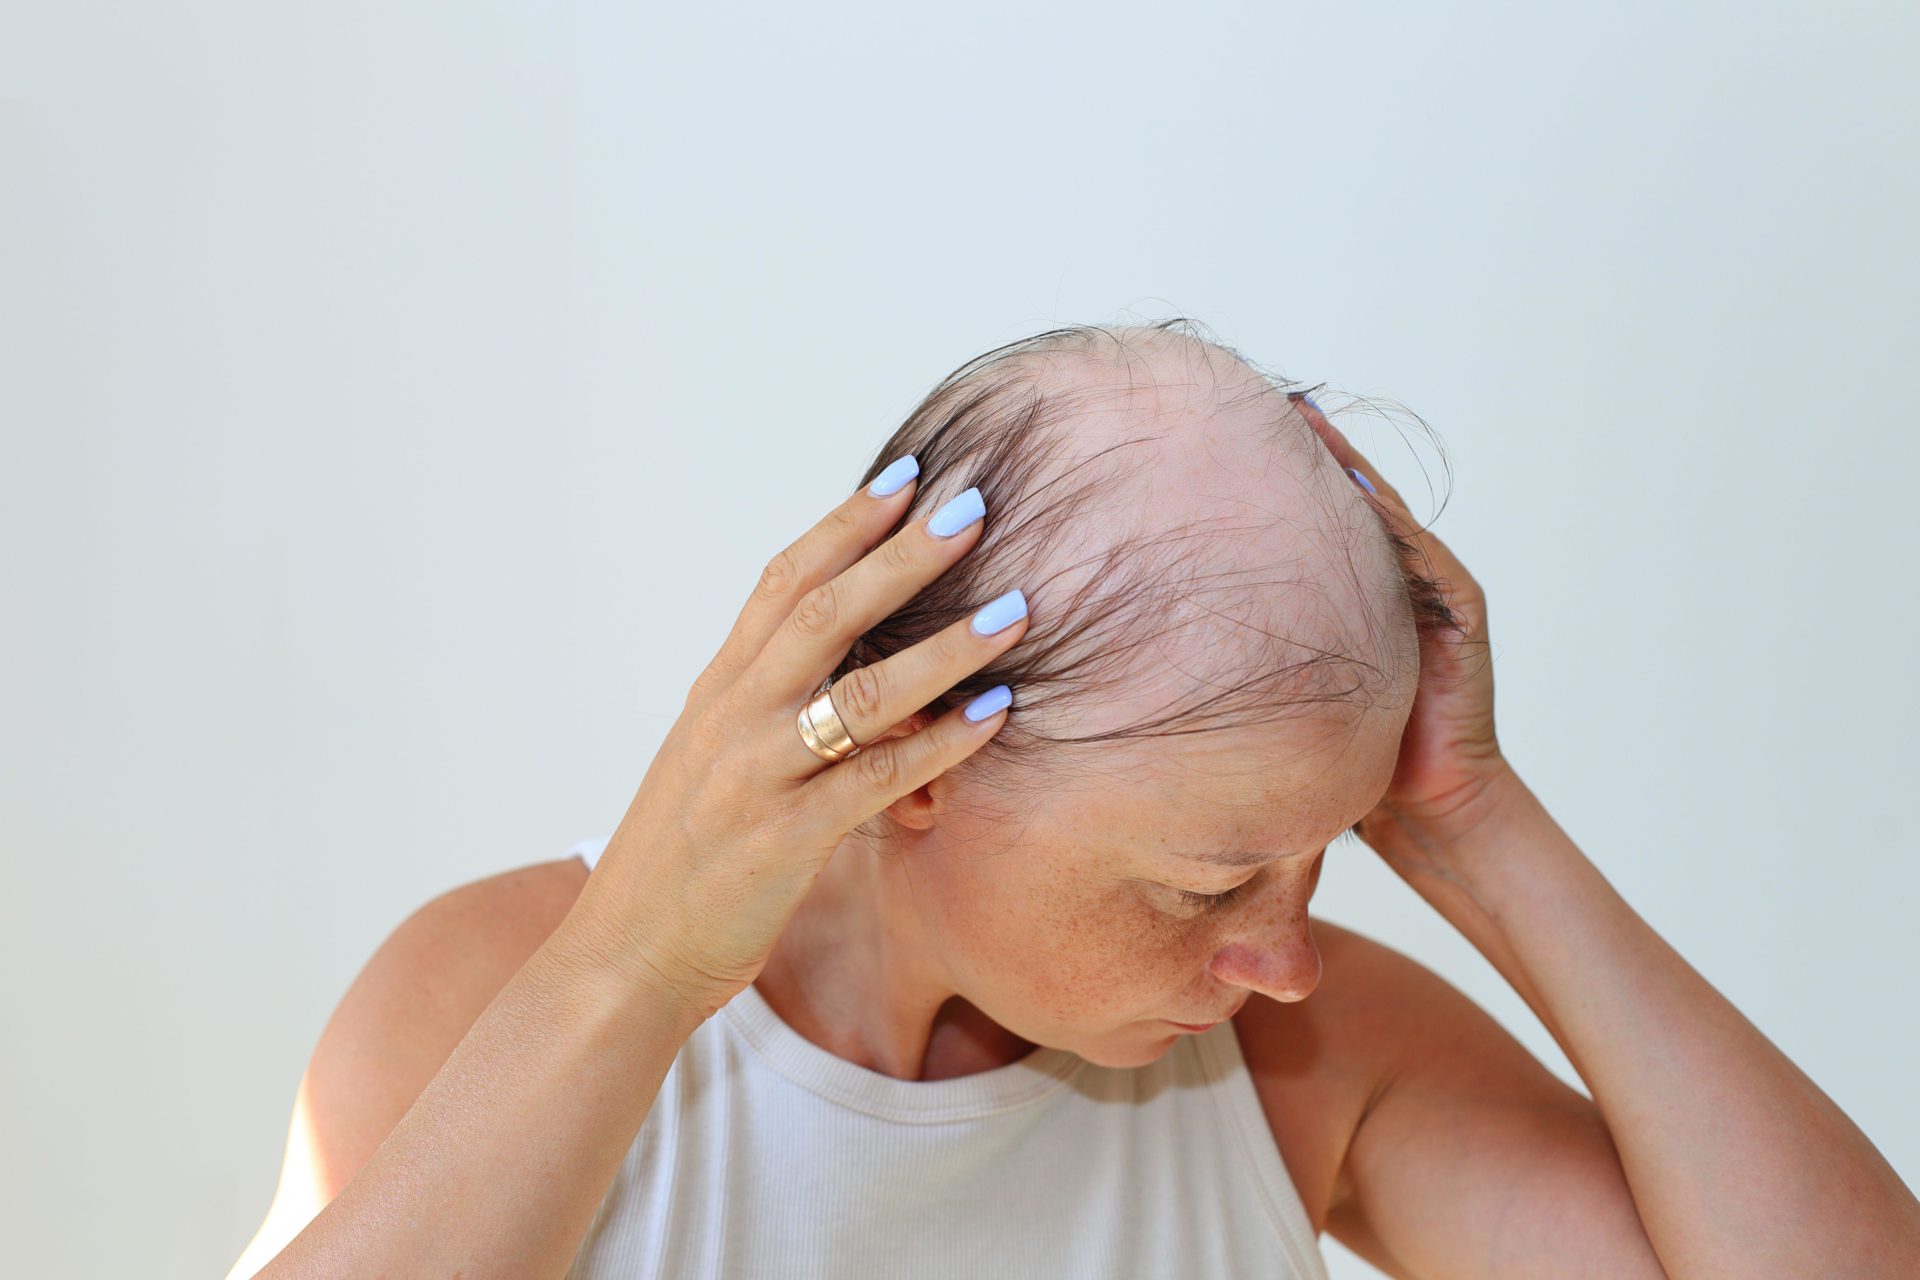 Hair loss in the form of alopecia areata